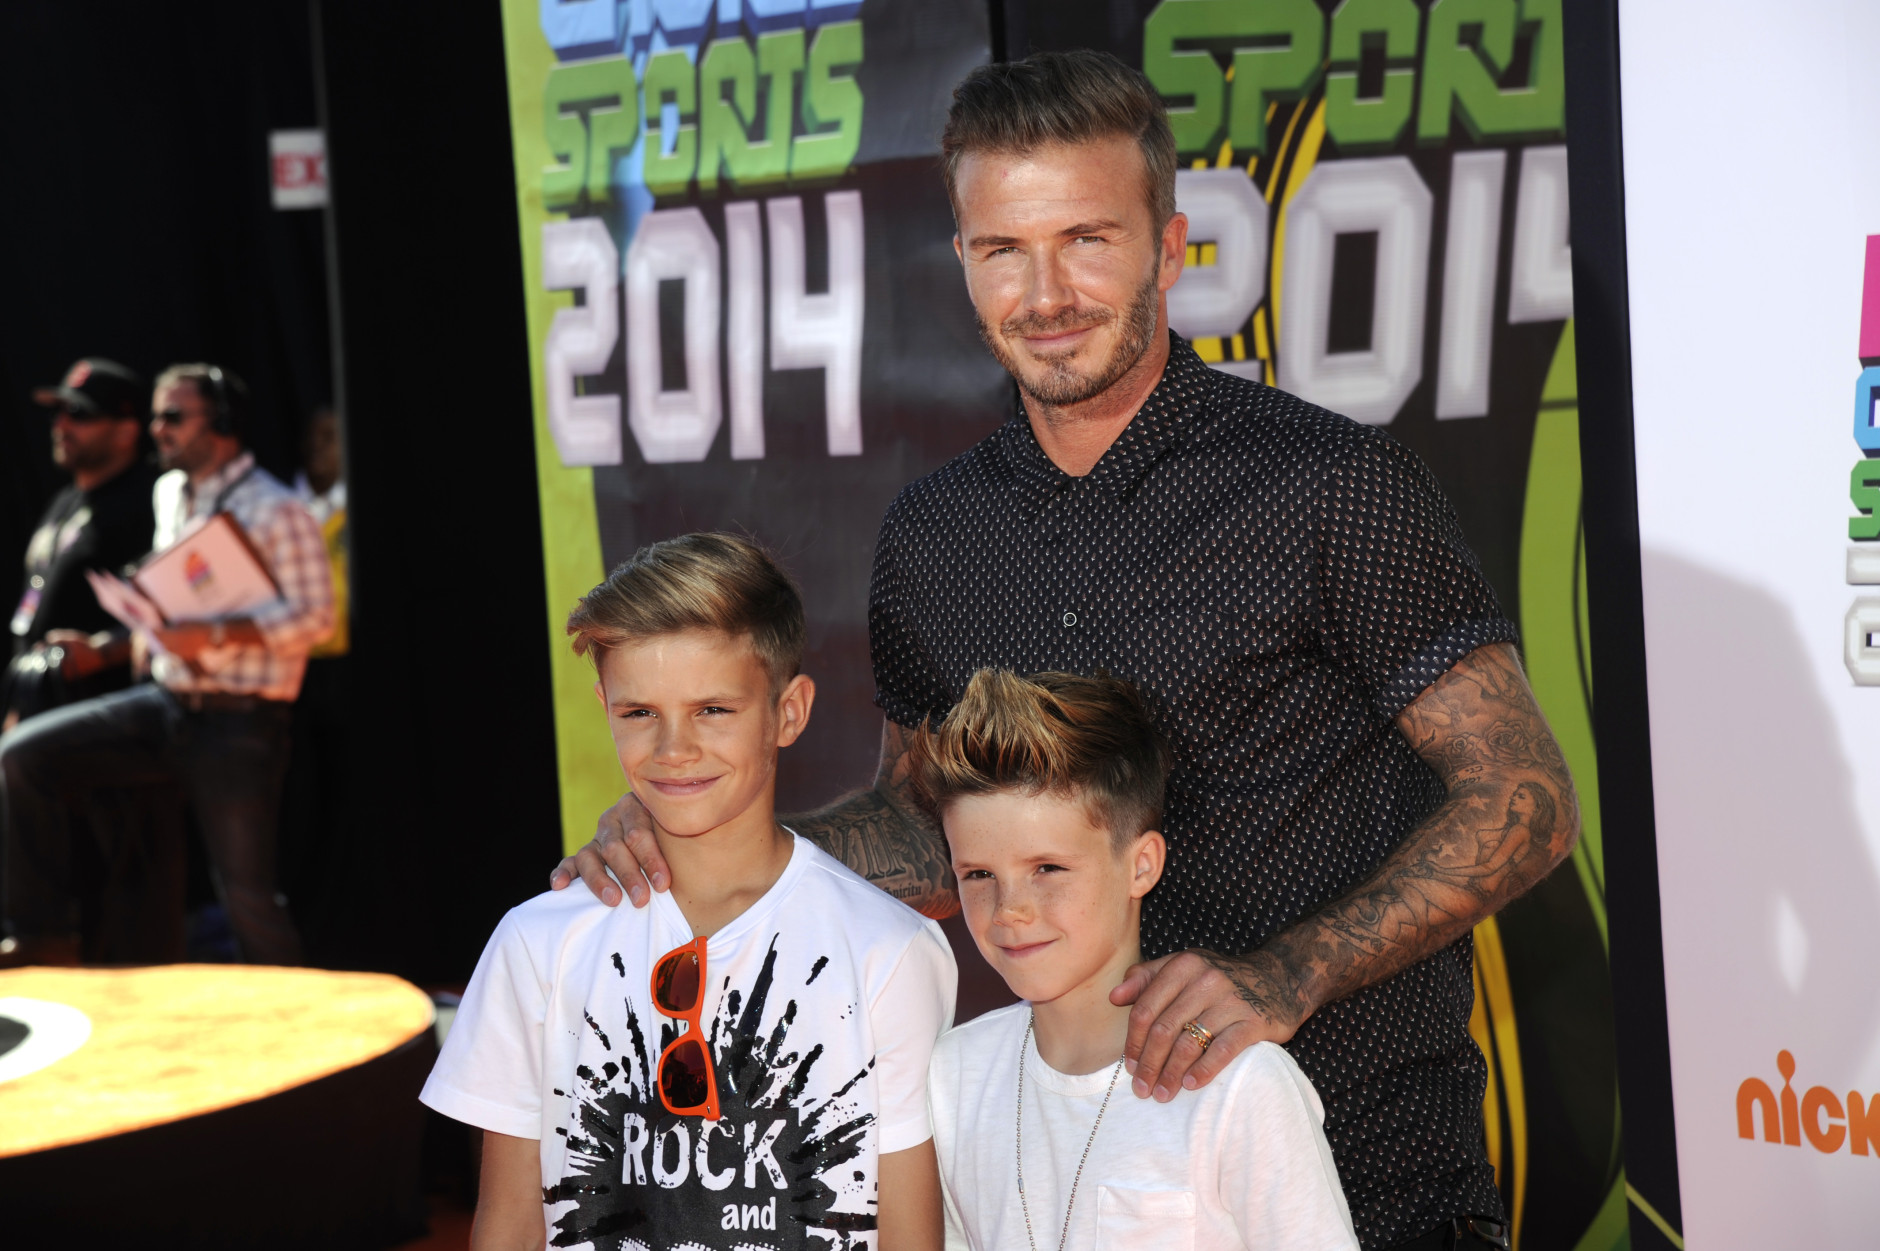 David Beckham, right, and his sons, from left, Romeo James Beckham and Cruz David Beckham arrive at the Kids' Choice Sports Awards at UCLA's Pauley Pavilion on Thursday, July 17, 2014, in Los Angeles. (Photo by Chris Pizzello/Invision/AP)